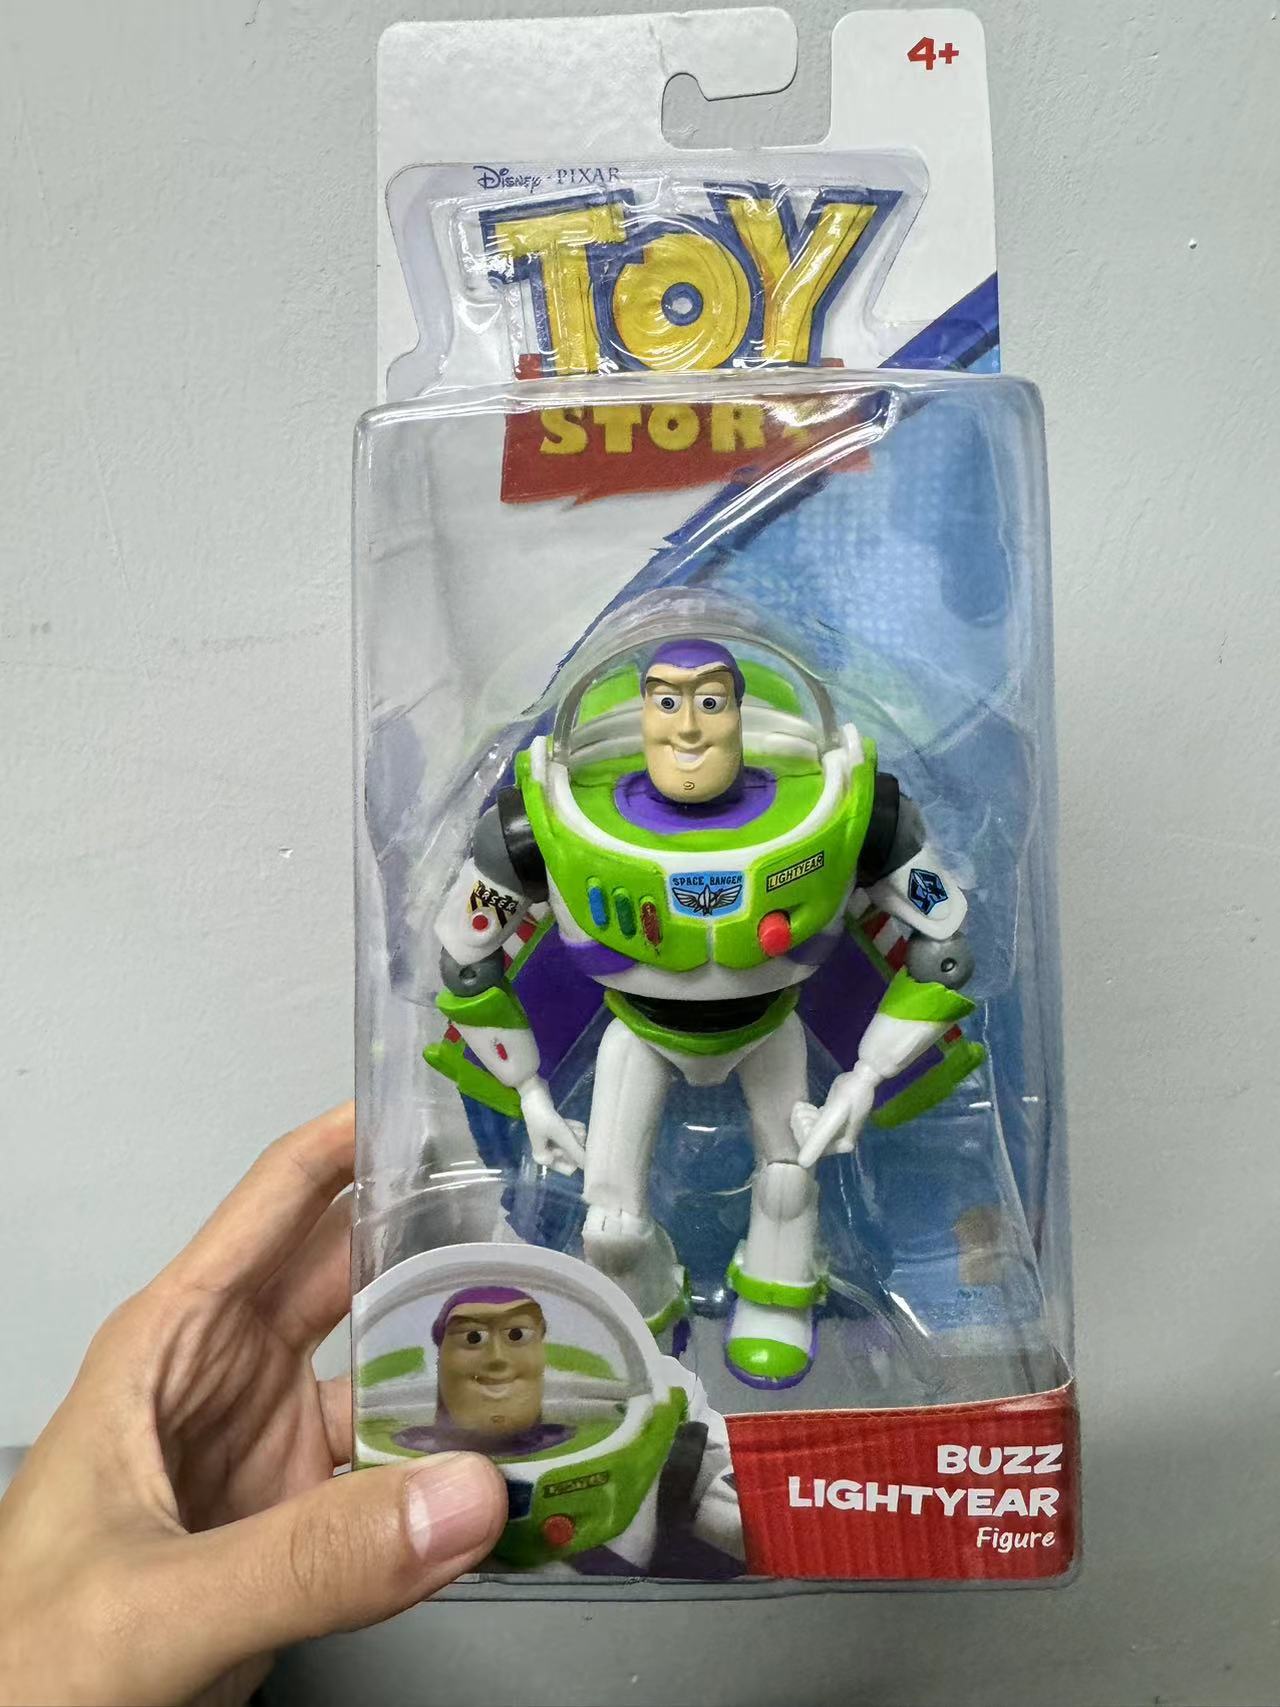 Toy 3 Flapping Wings Hudi Buba Lightyear Doll Movie Doll Action Figure Hand-Made